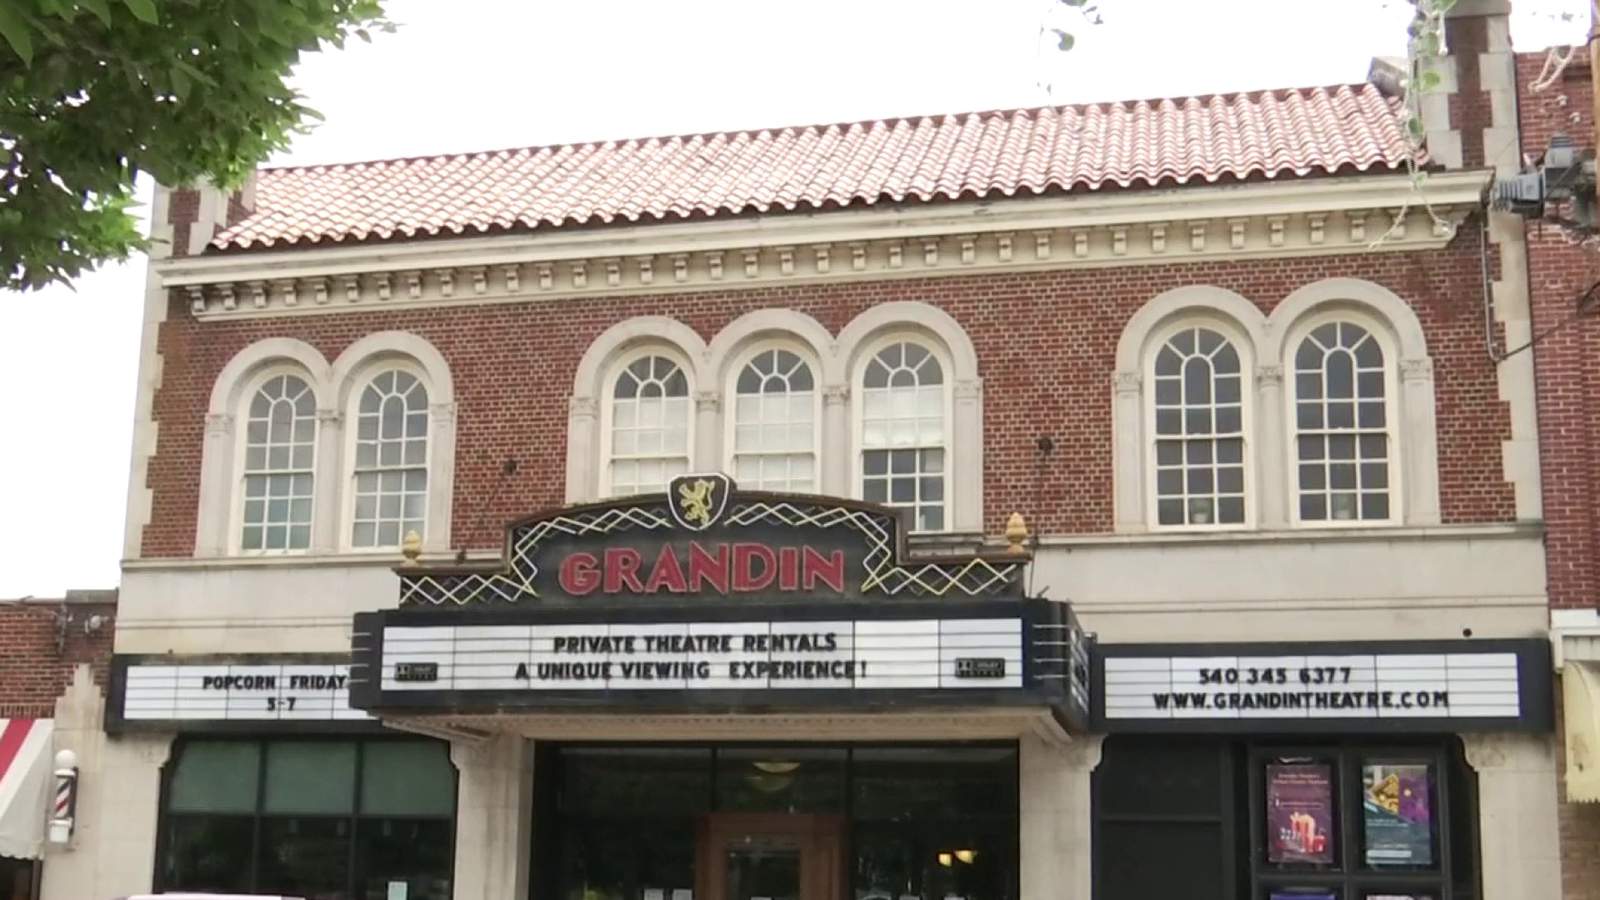 Roanoke’s Grandin Theatre will remain closed for the foreseeable future